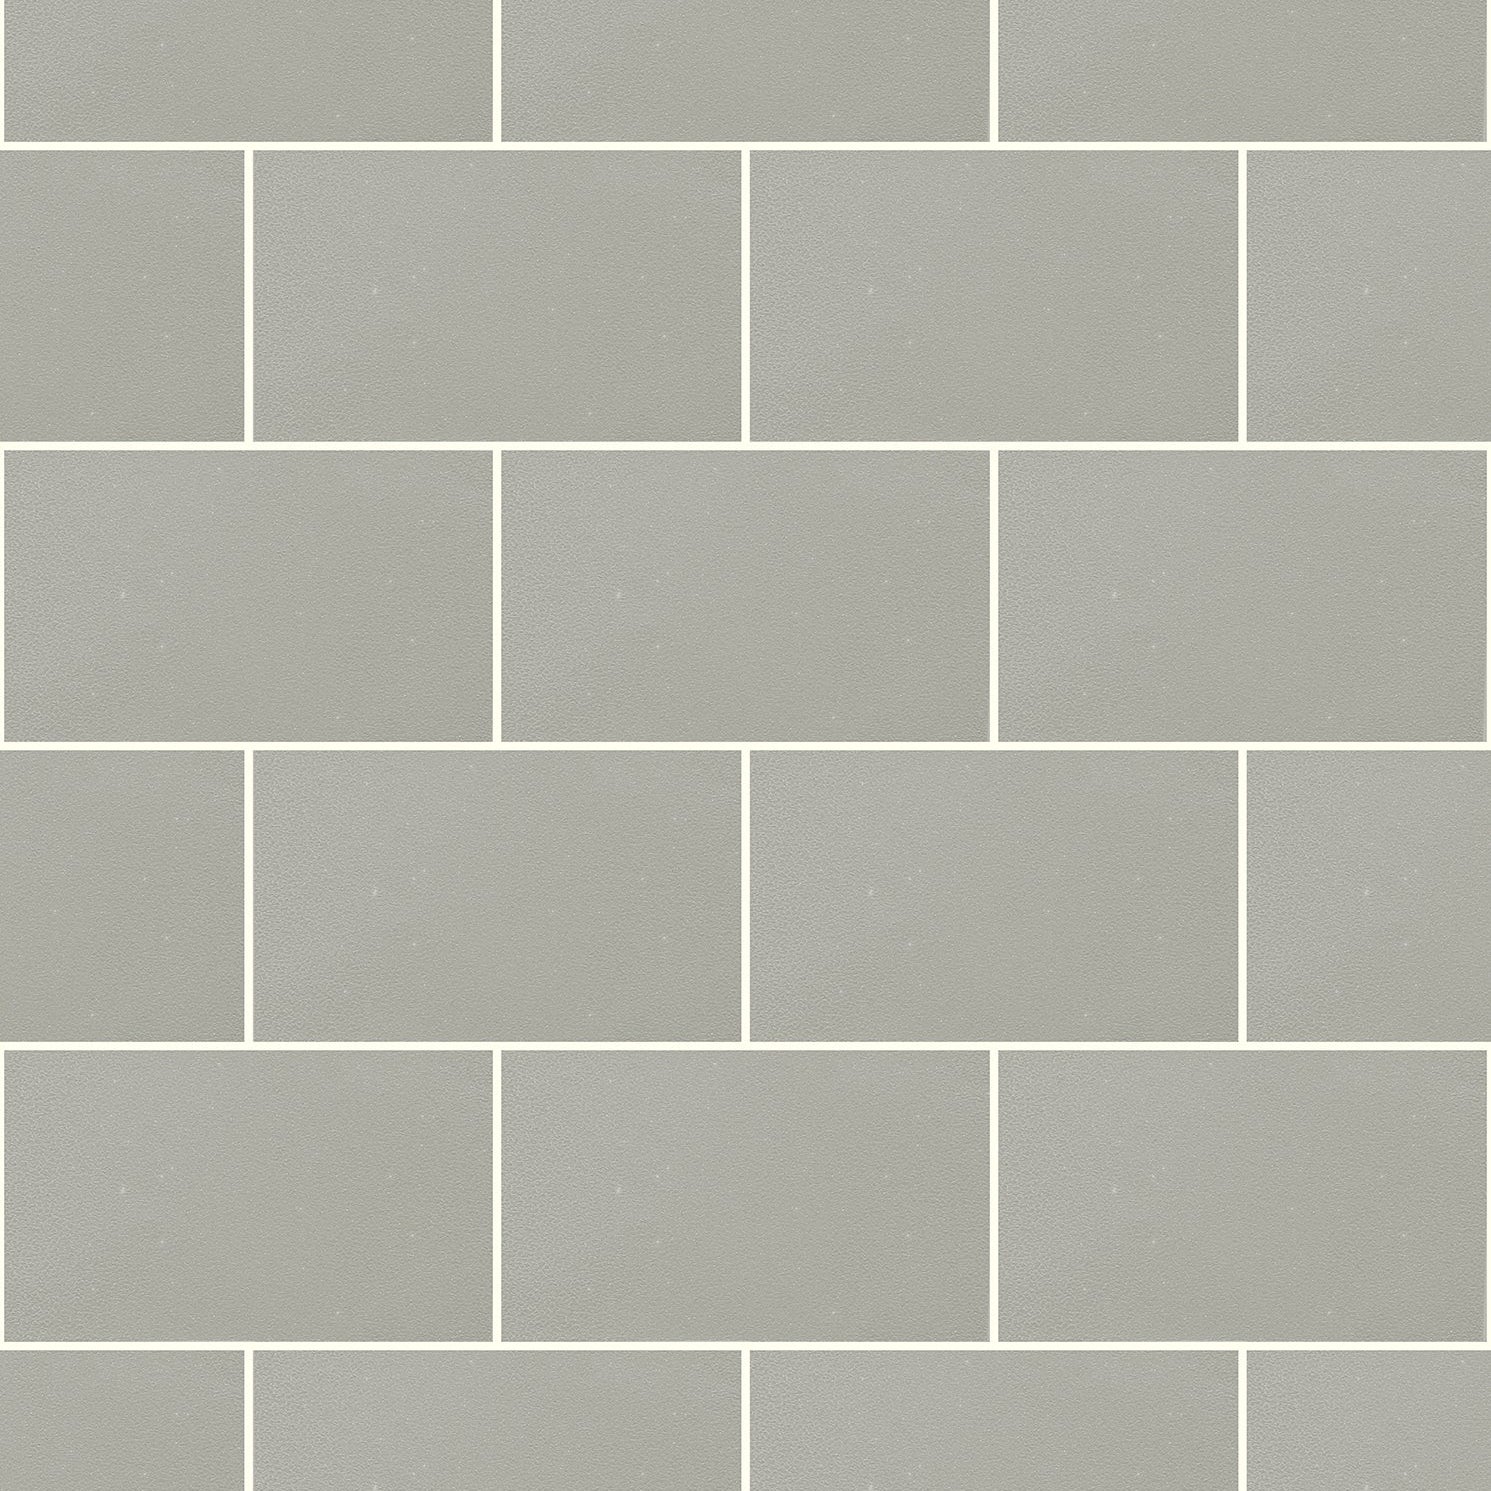 Find 2836-M1123 Shades of Grey Greys Tiles Wallpaper by Advantage